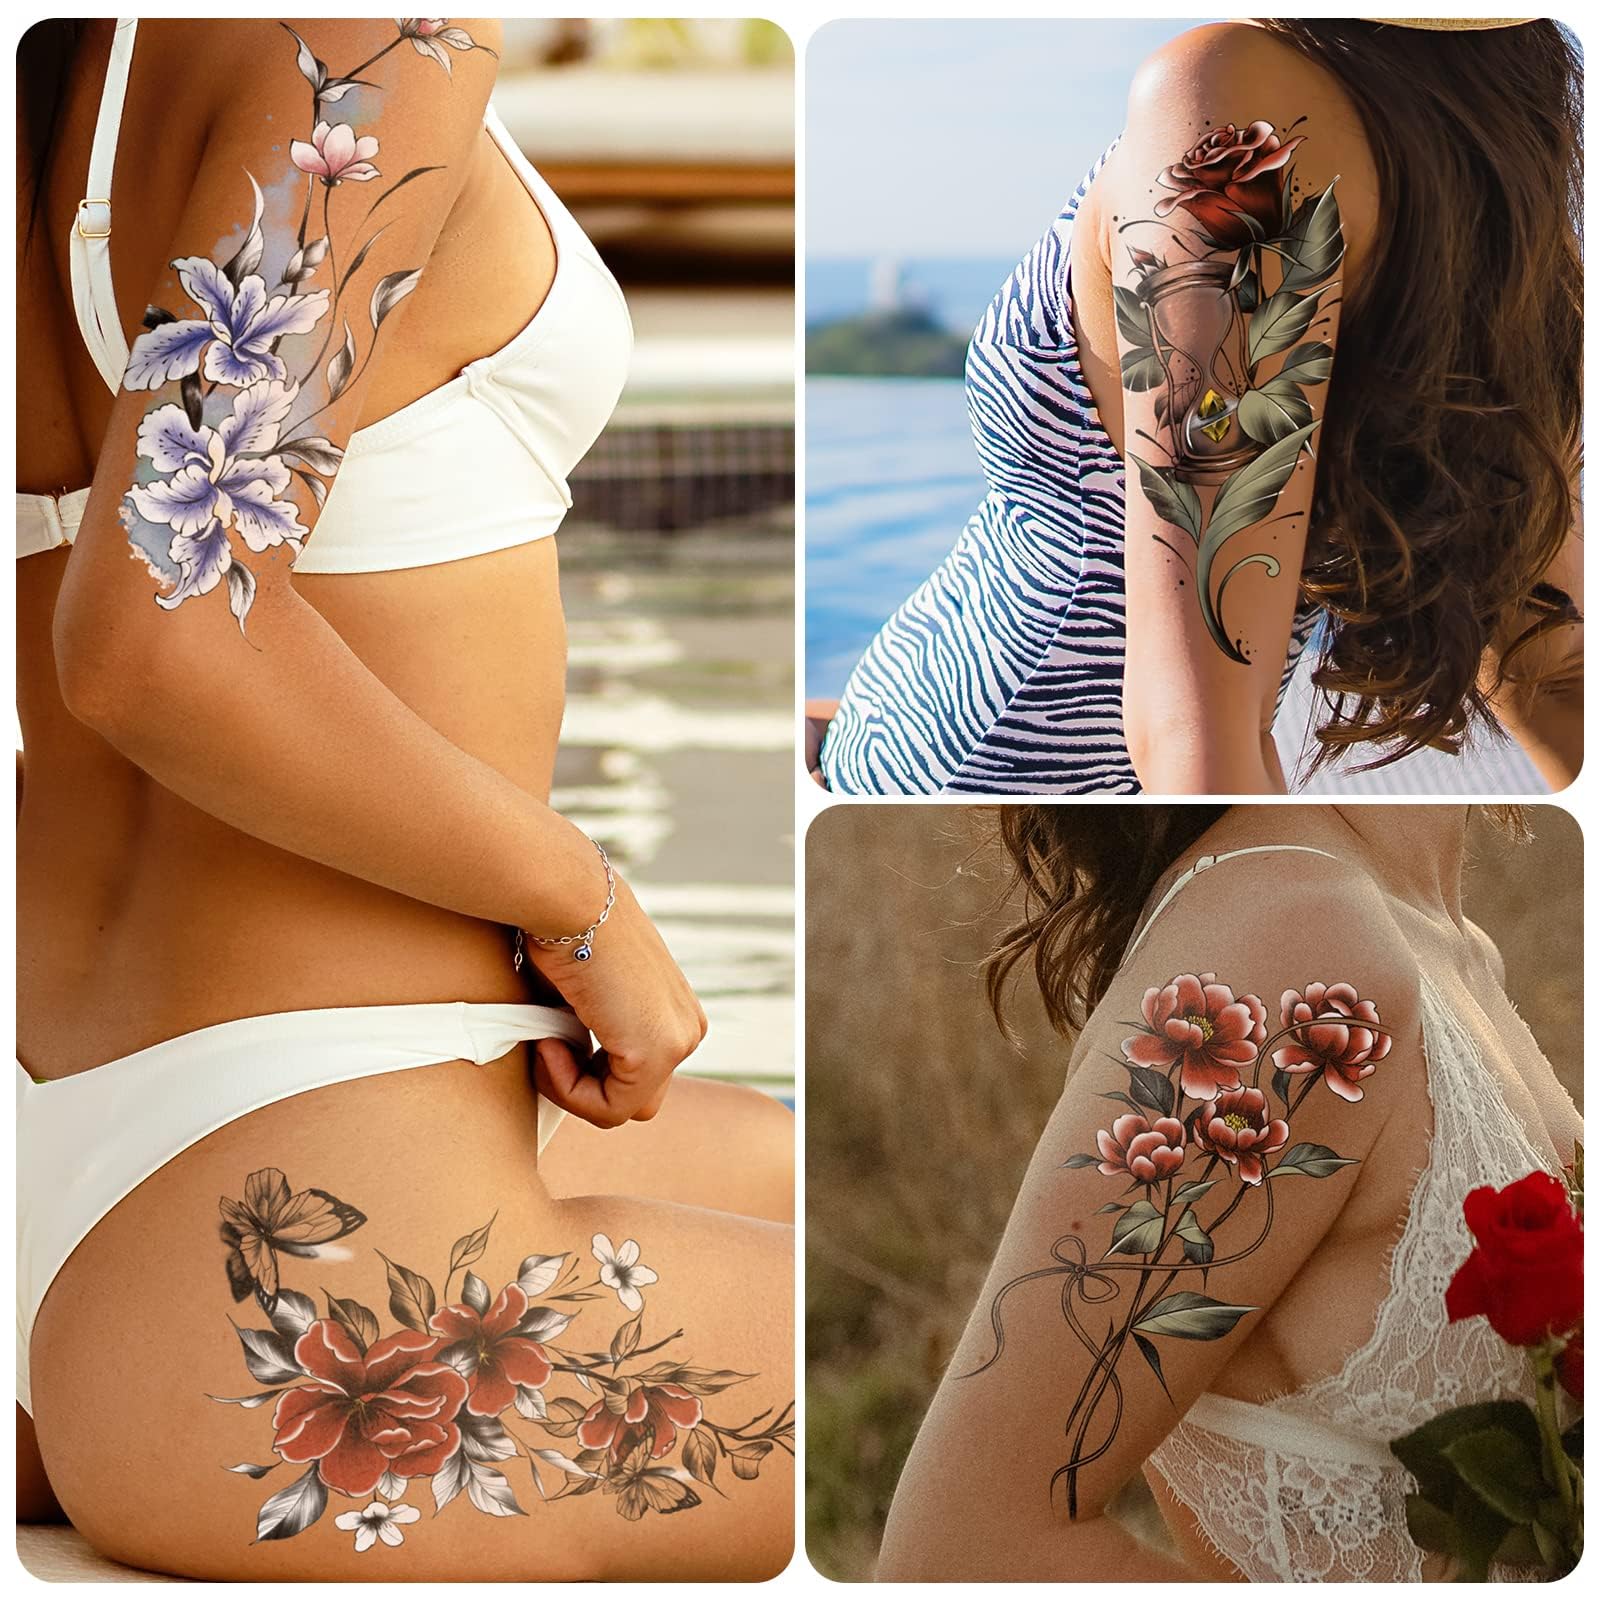 EMOME Half Arm Colorful Rose Fake Tattoos That Look Real and Last Long,12 Sheets Large Temporary Tattoos for Women, Hand Tattoo Stickers and Temporary Tattoo Sleeves for Adults Girls Neck Arm